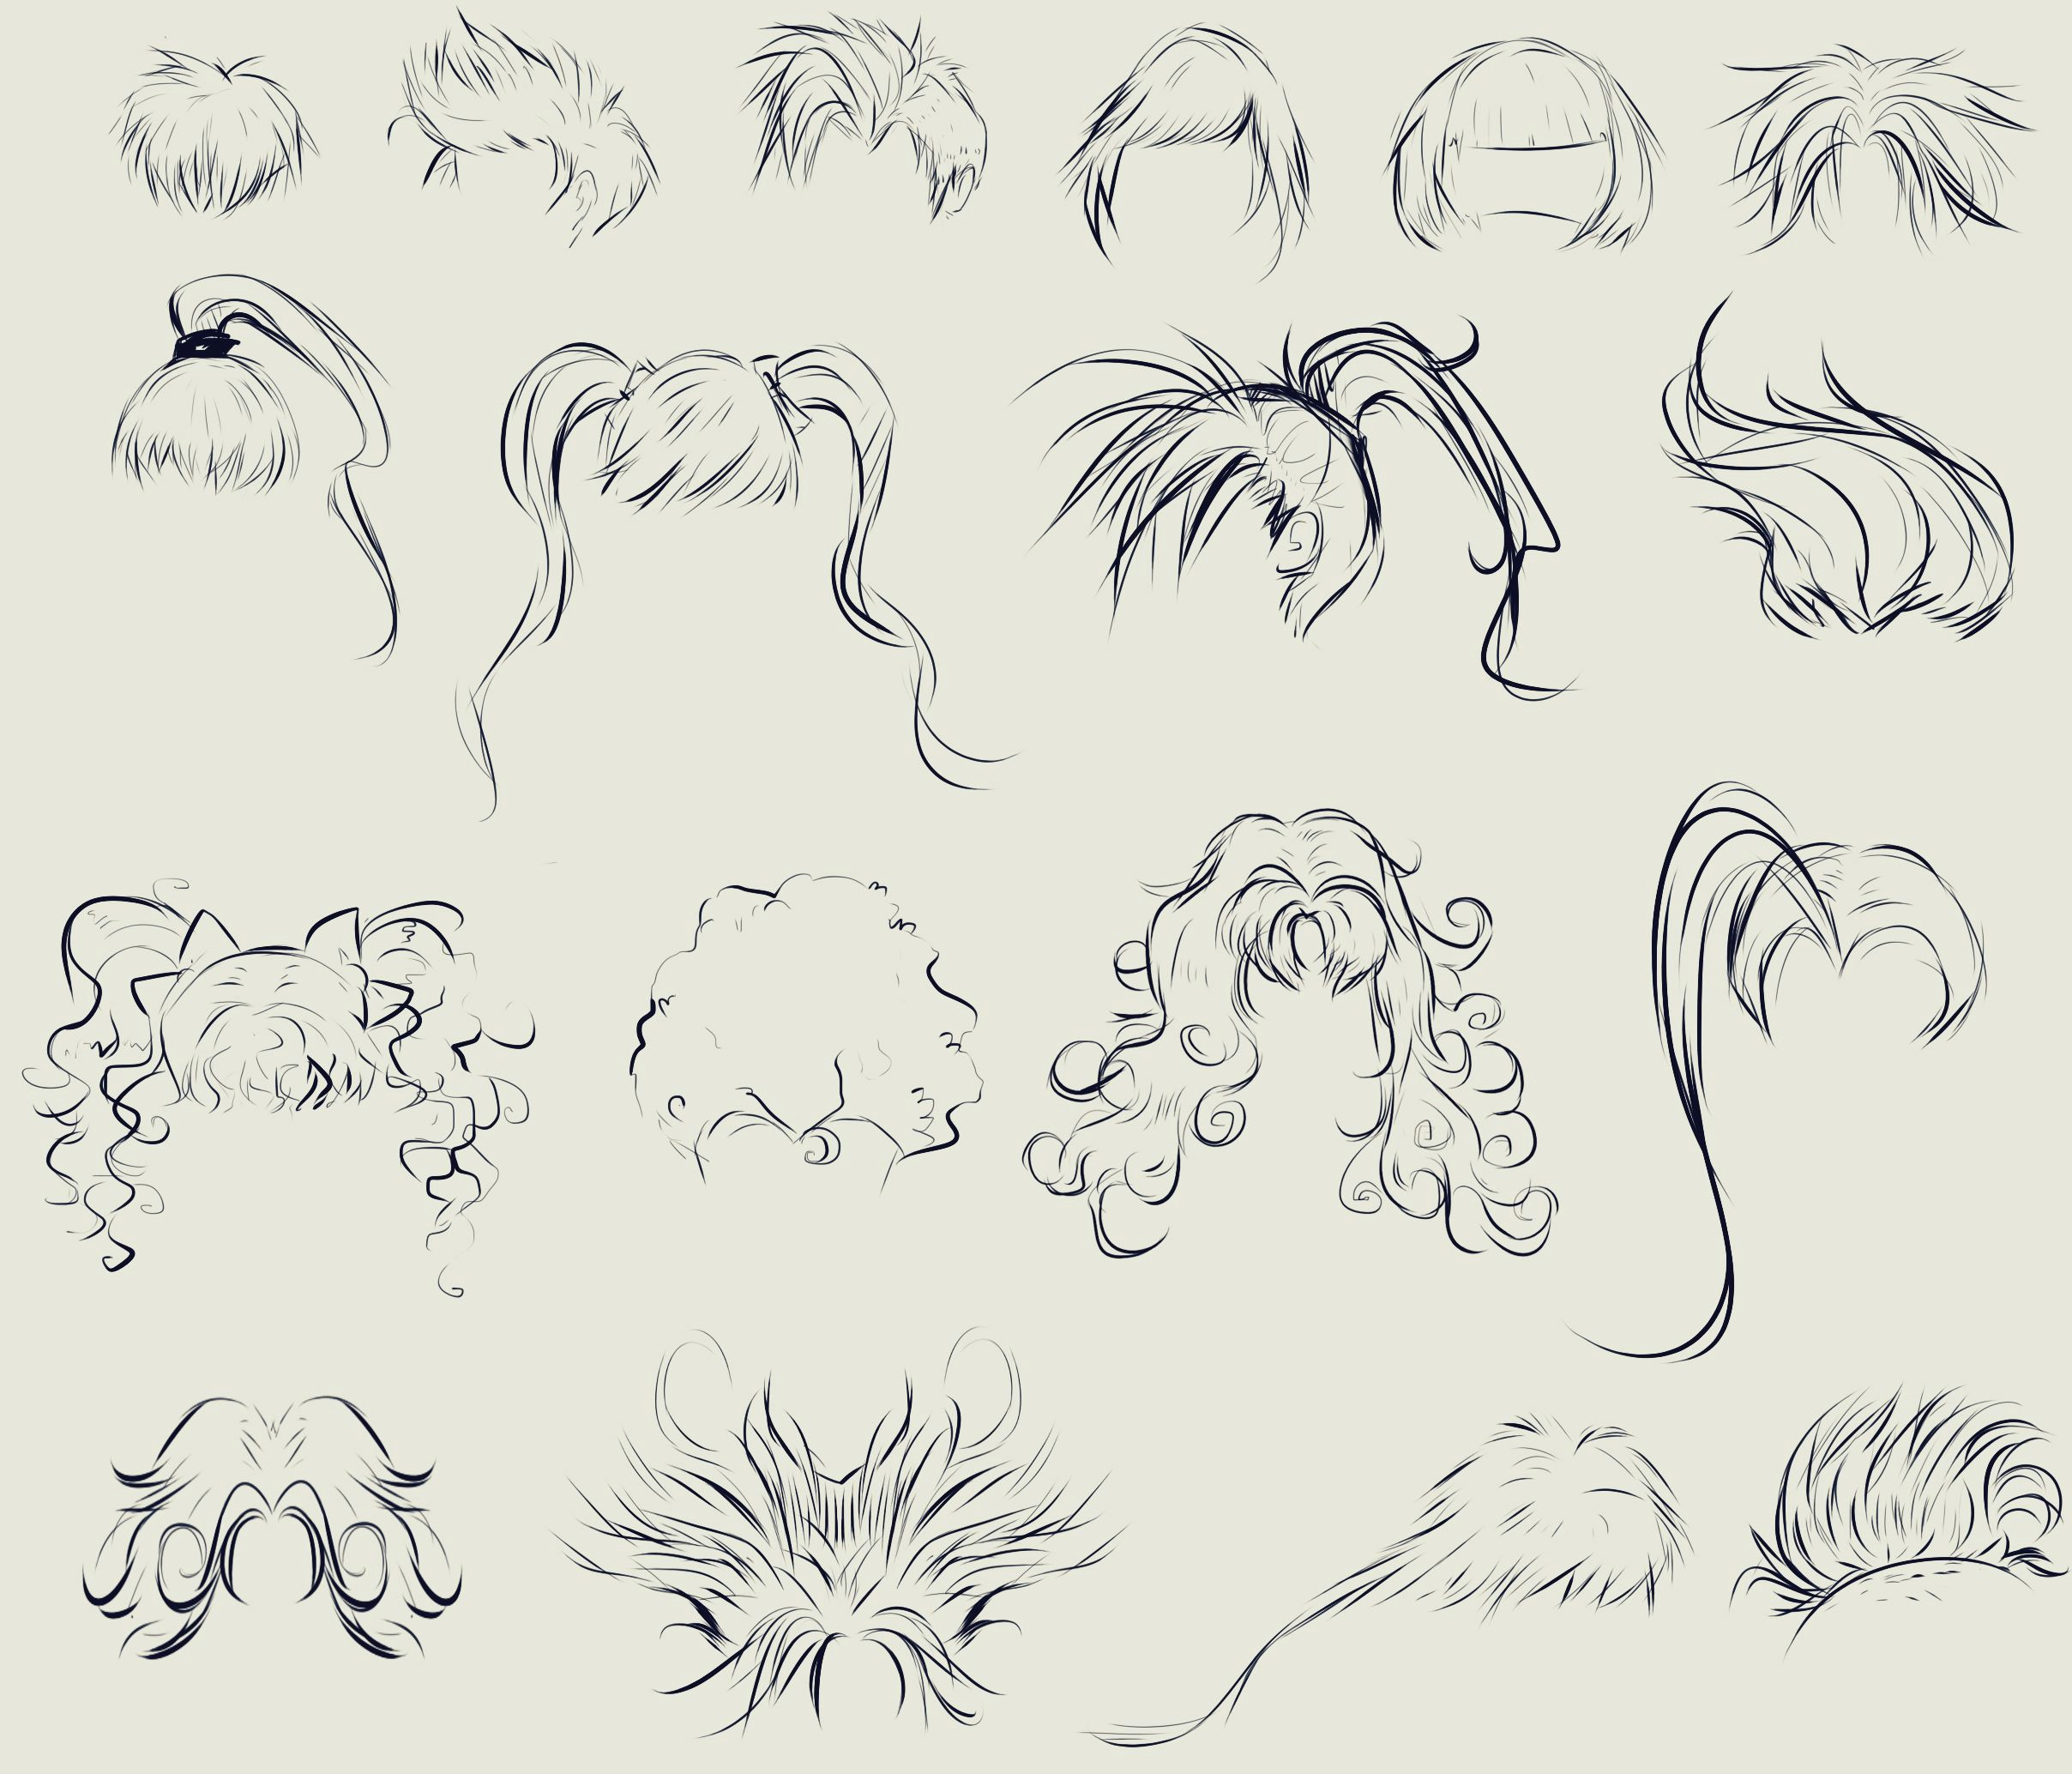 Drawing A Cartoon Hair This Anime Hair Reference Sheet by Ryky is All You Need to Get Those